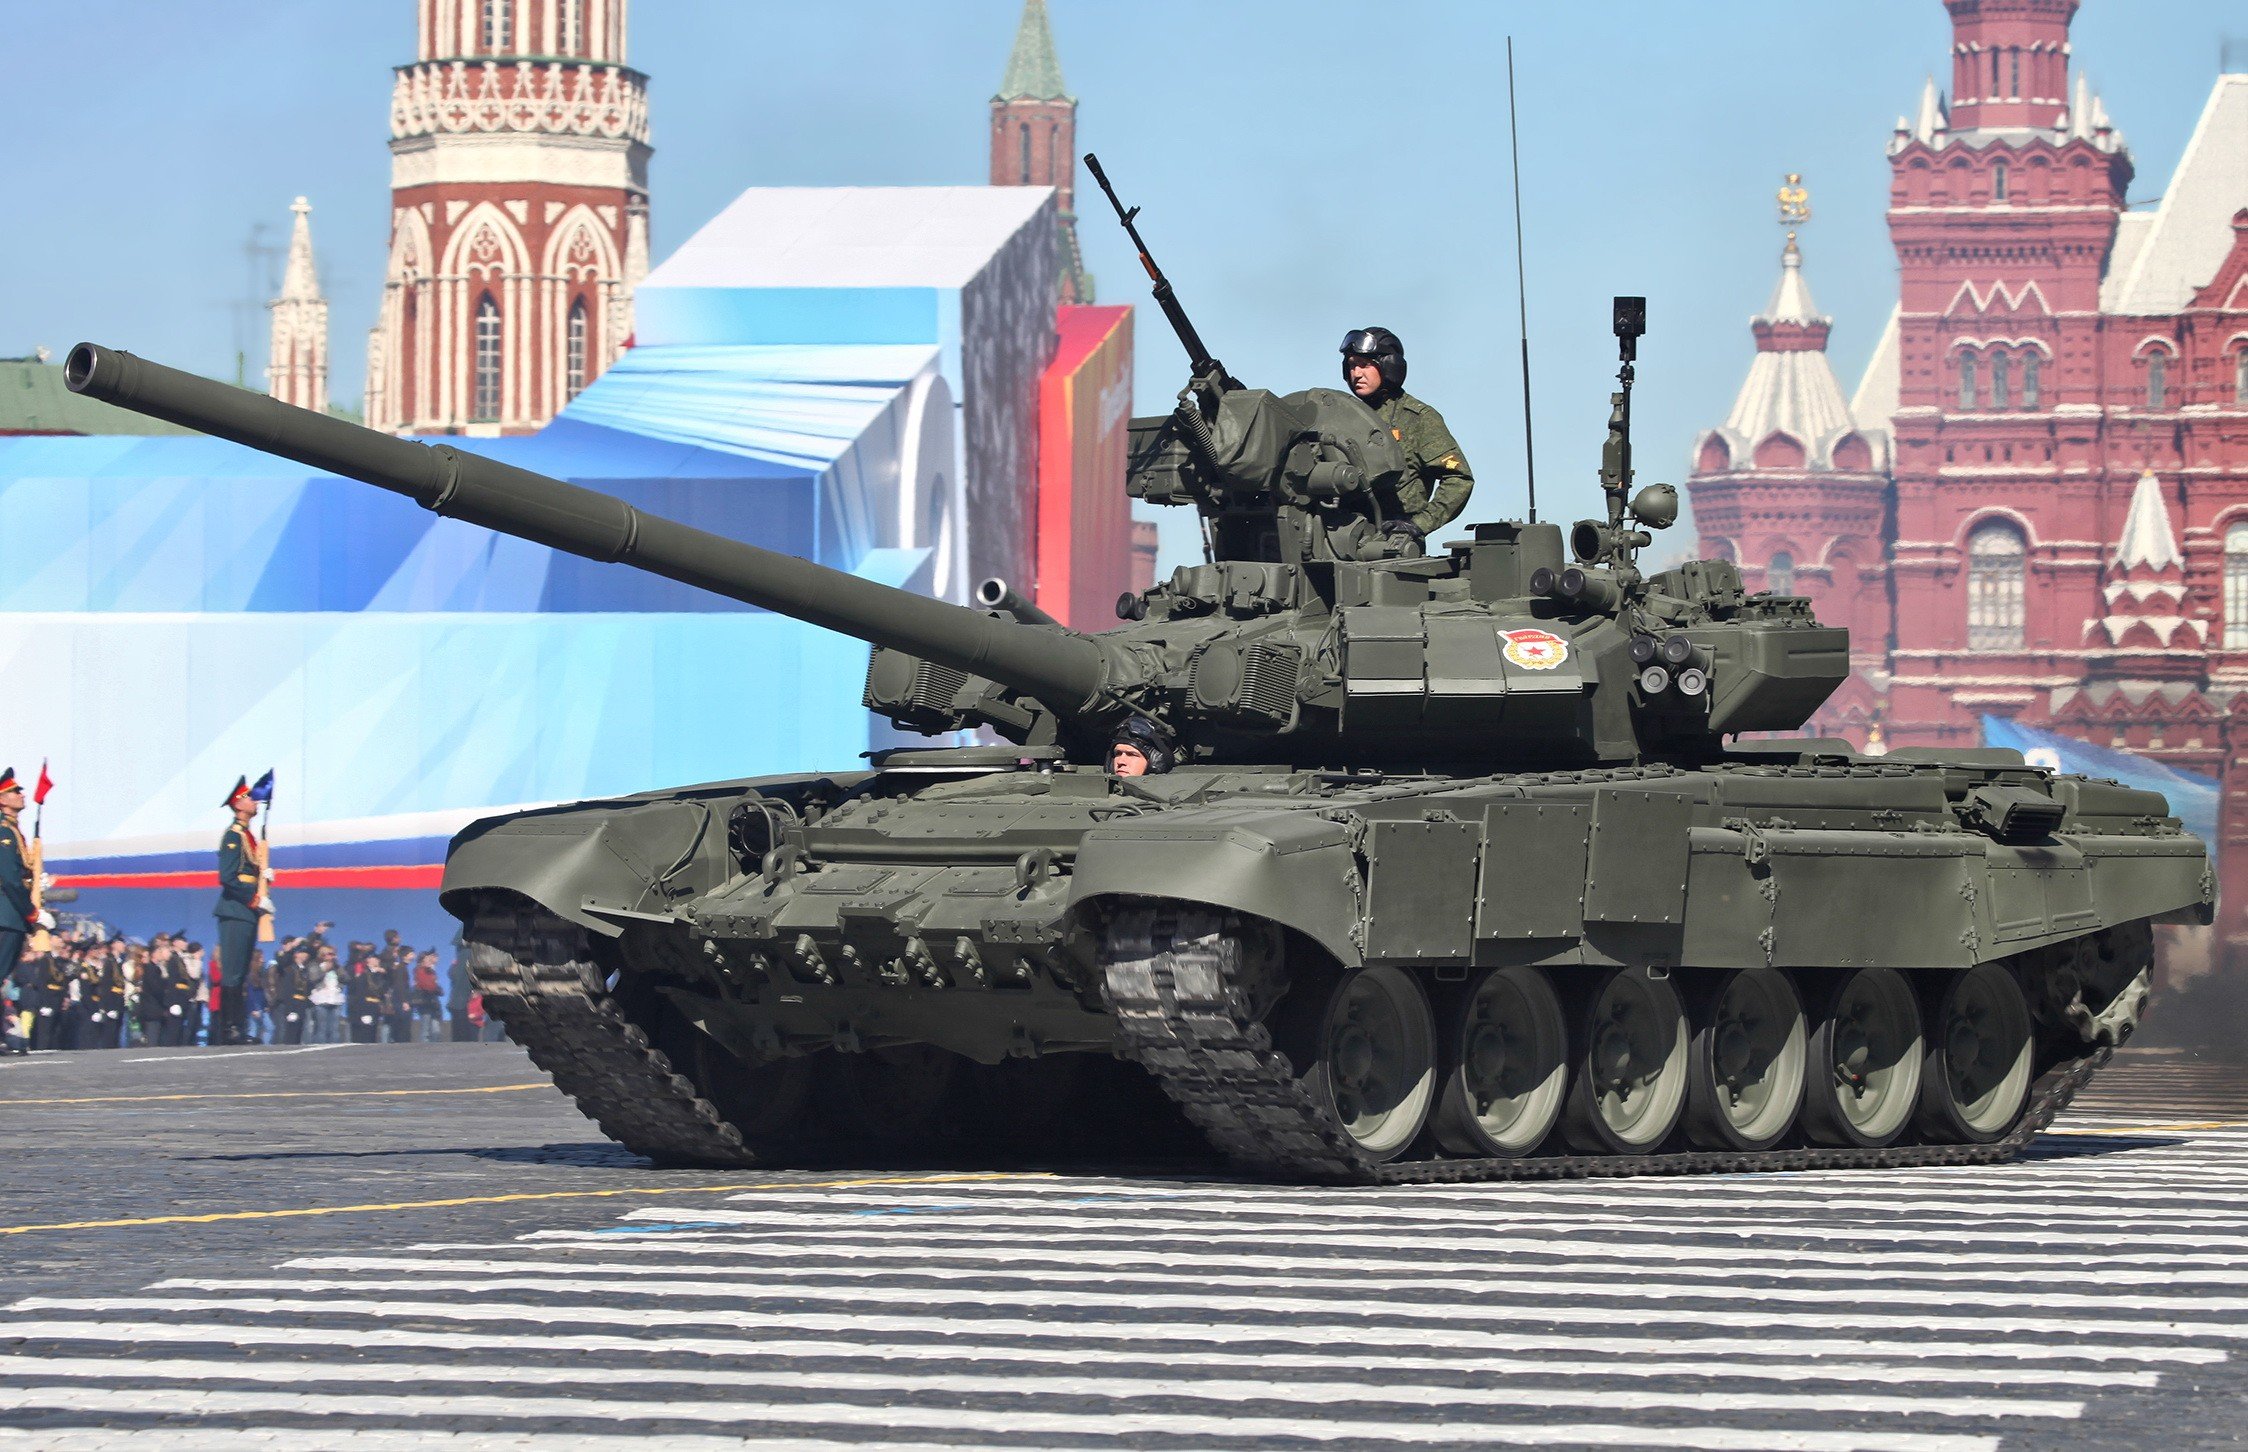 Wallpaper, Moscow, weapon, tank, military, Russia, Russian Army, army, T Red Square, land vehicle, combat vehicle, self propelled artillery 2248x1452